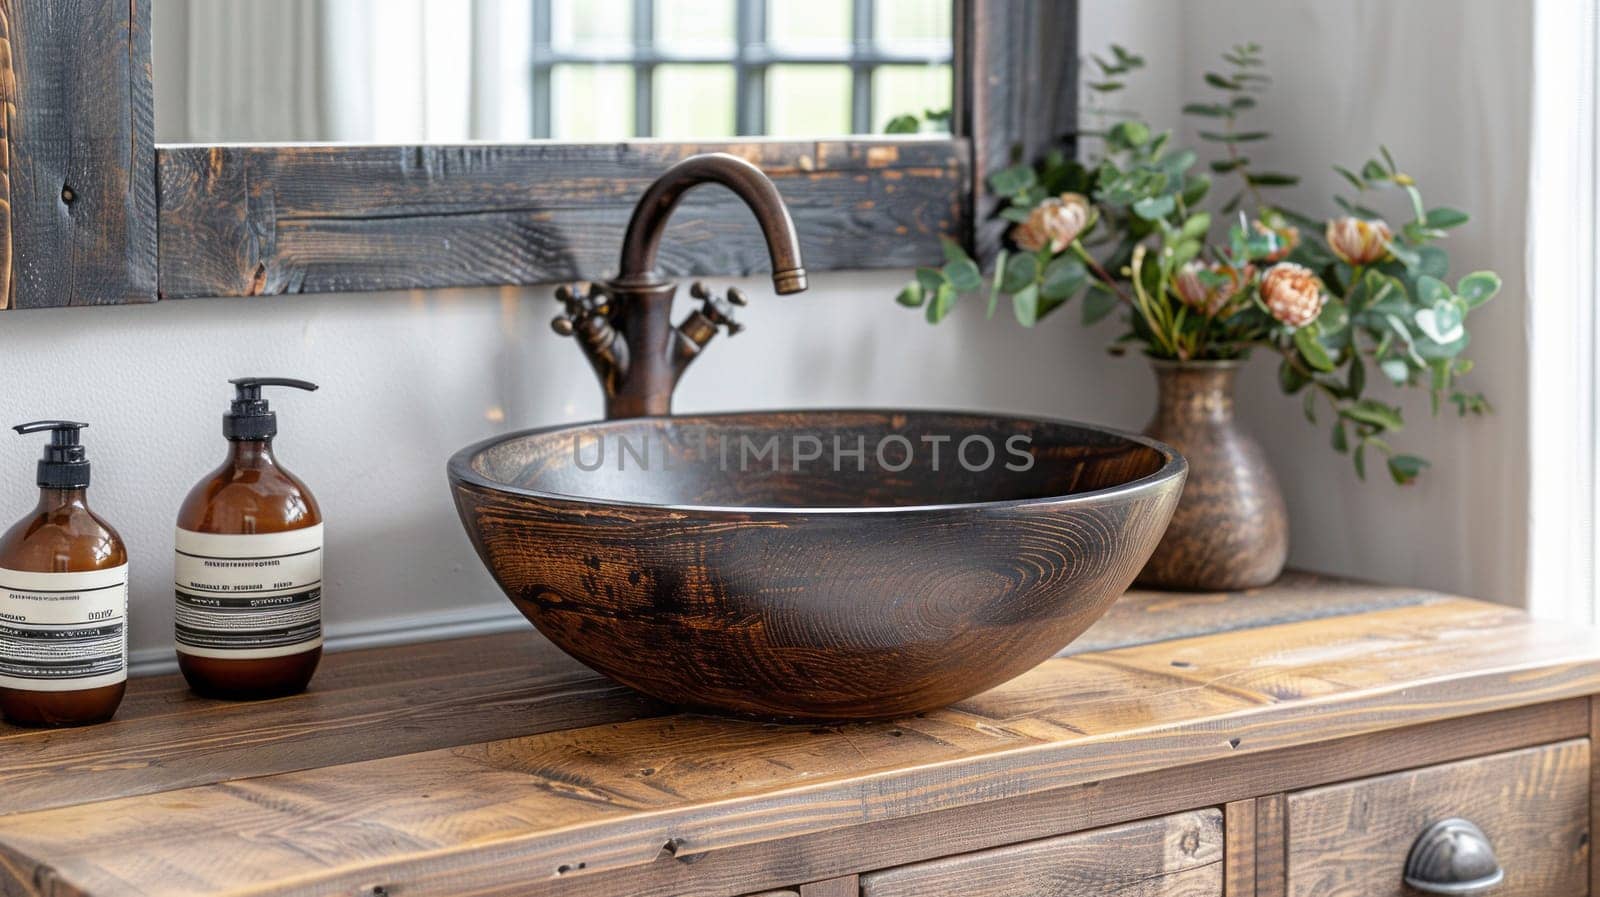 Stylish vessel sink and faucet on wooden countertop. Interior design of modern bathroom by NataliPopova